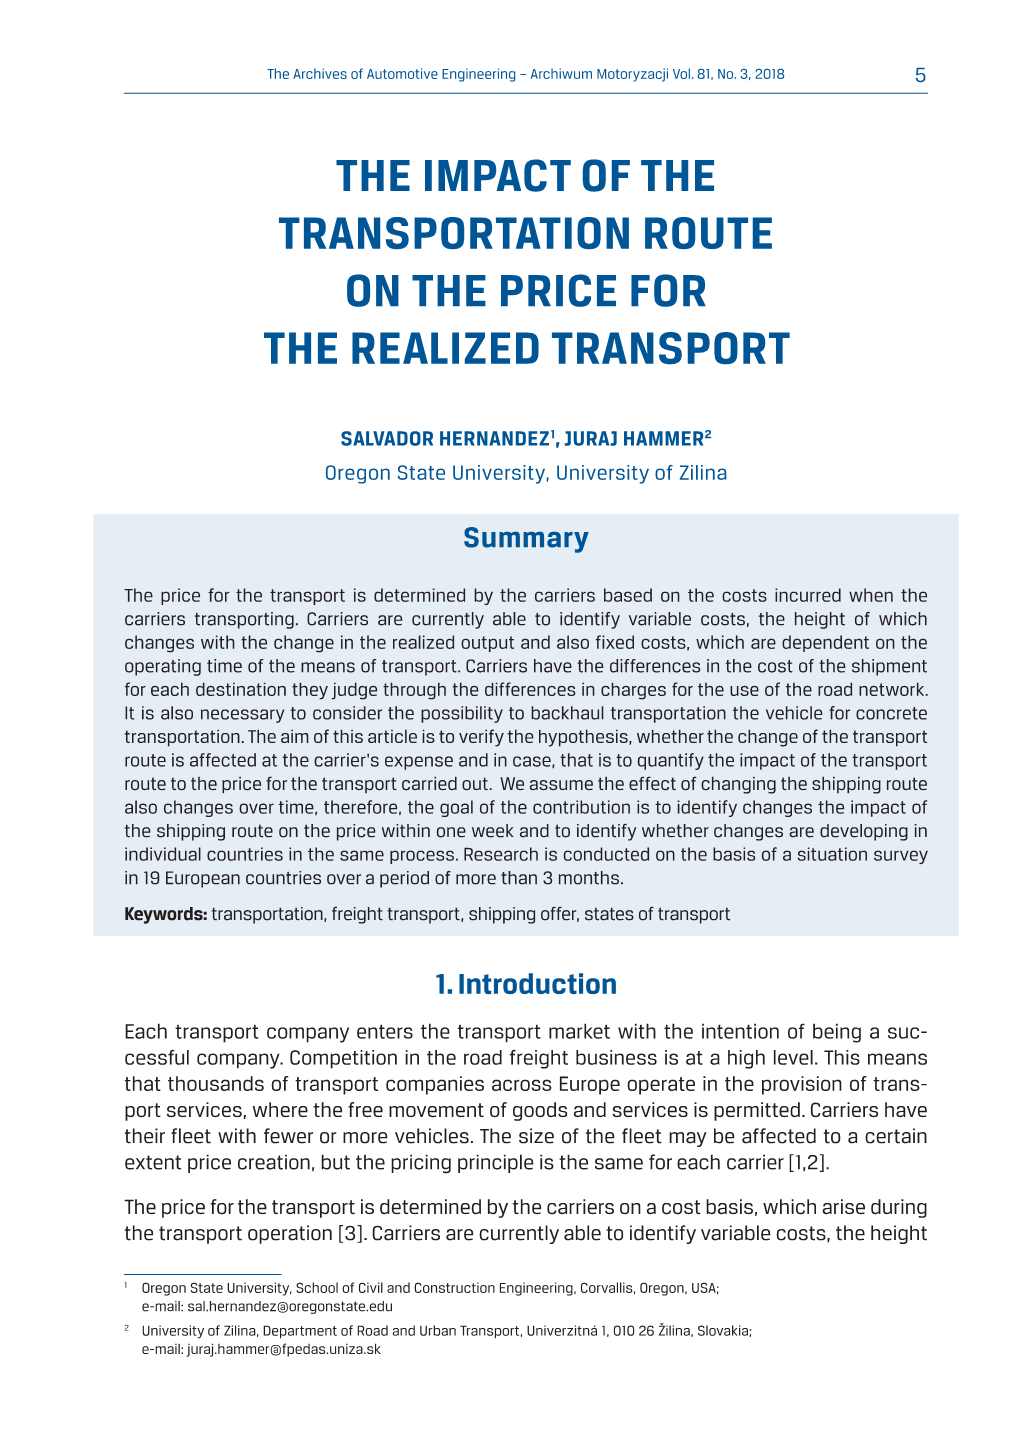 The Impact of the Transportation Route on the Price for the Realized Transport